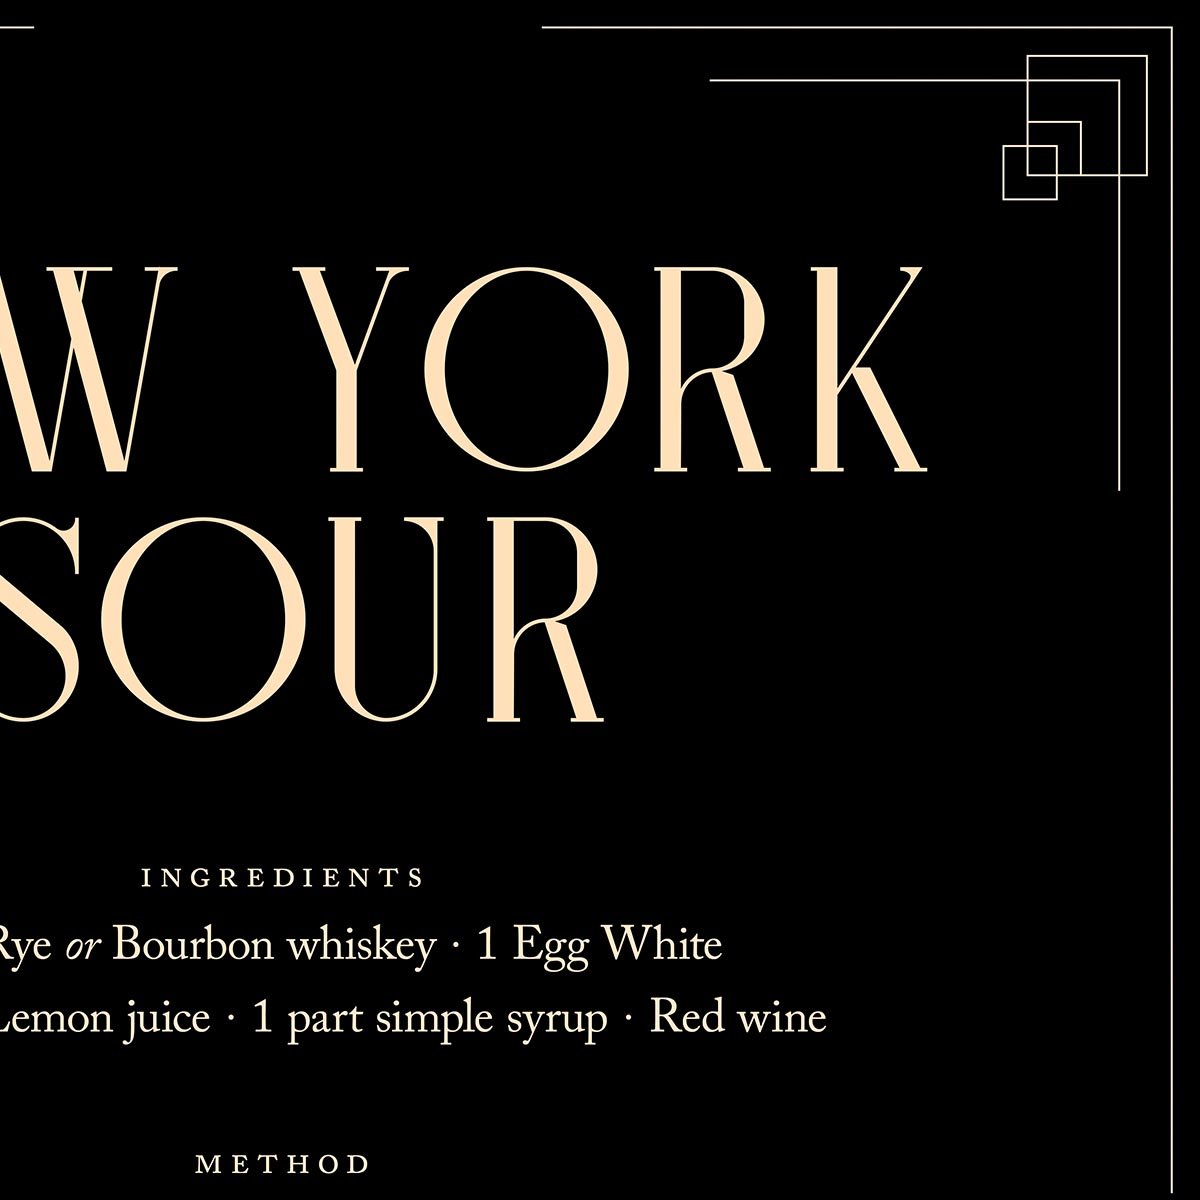 New York Sour Cocktail Recipe Poster